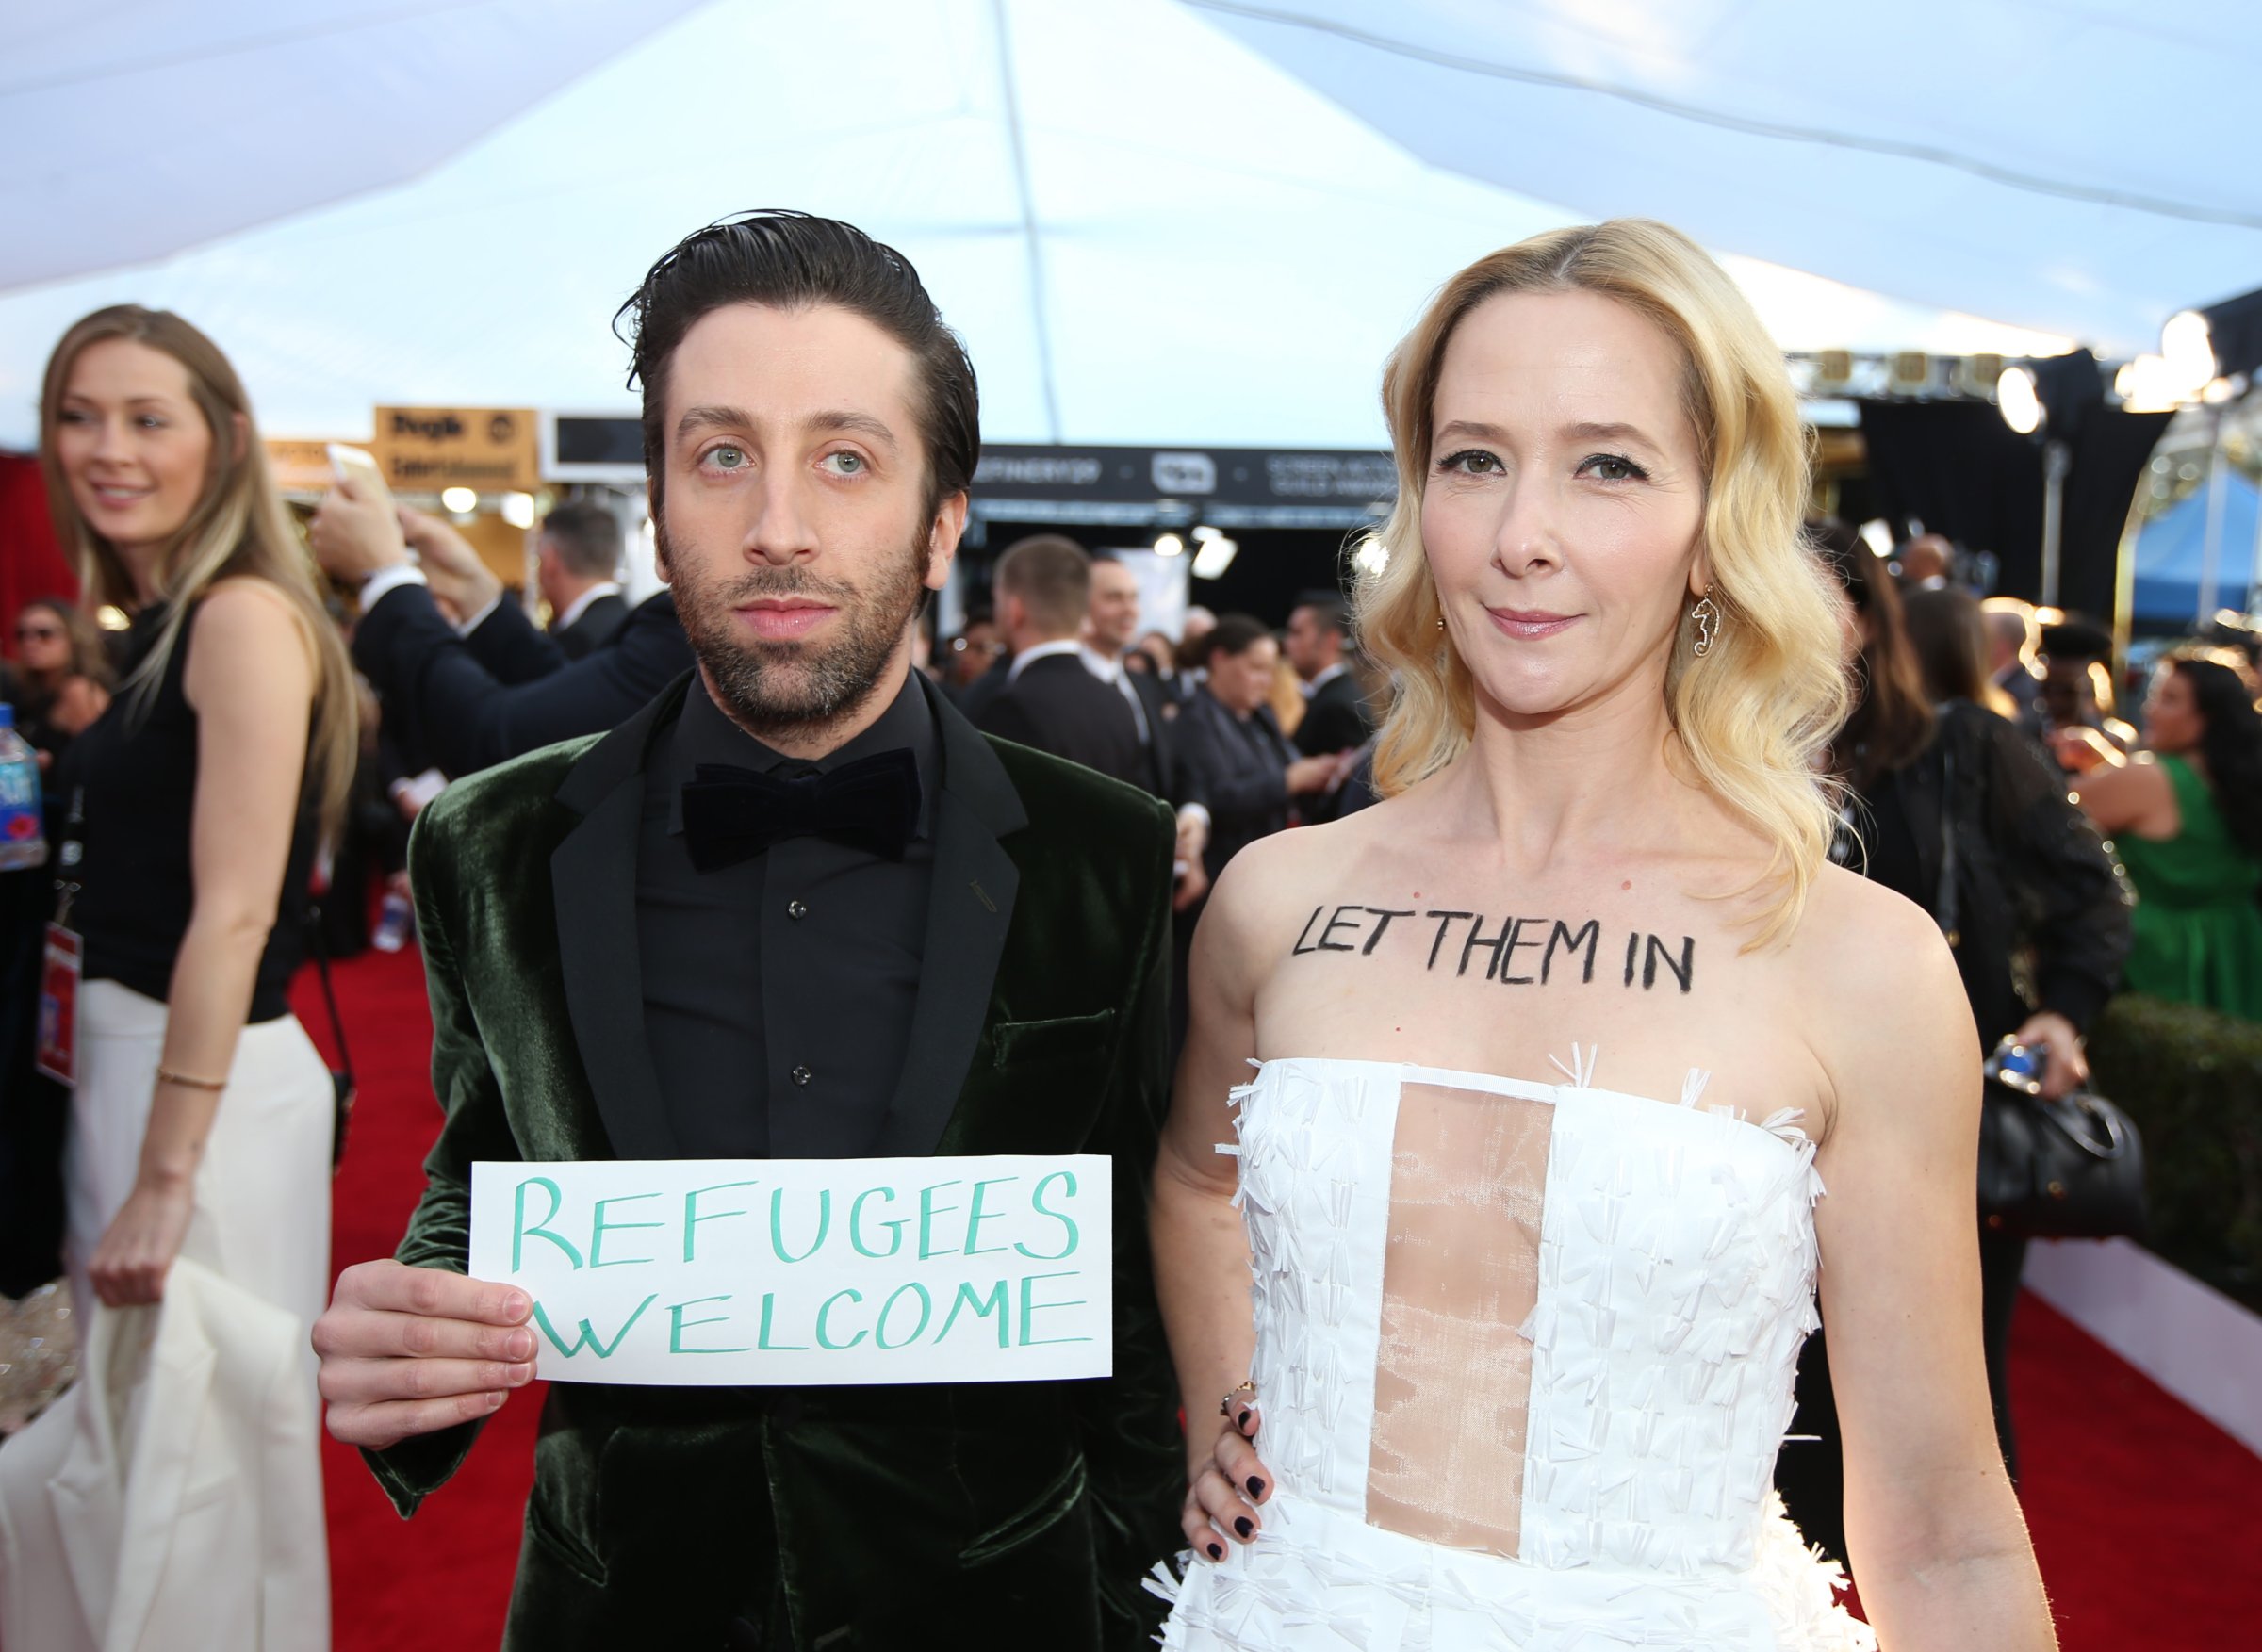 Actor Simon Helberg and his wife actress Simon Helberg make a political statement about the current U.S. restriction on refugees as they arrive at the 23rd Screen Actors Guild Awards in Los Angeles